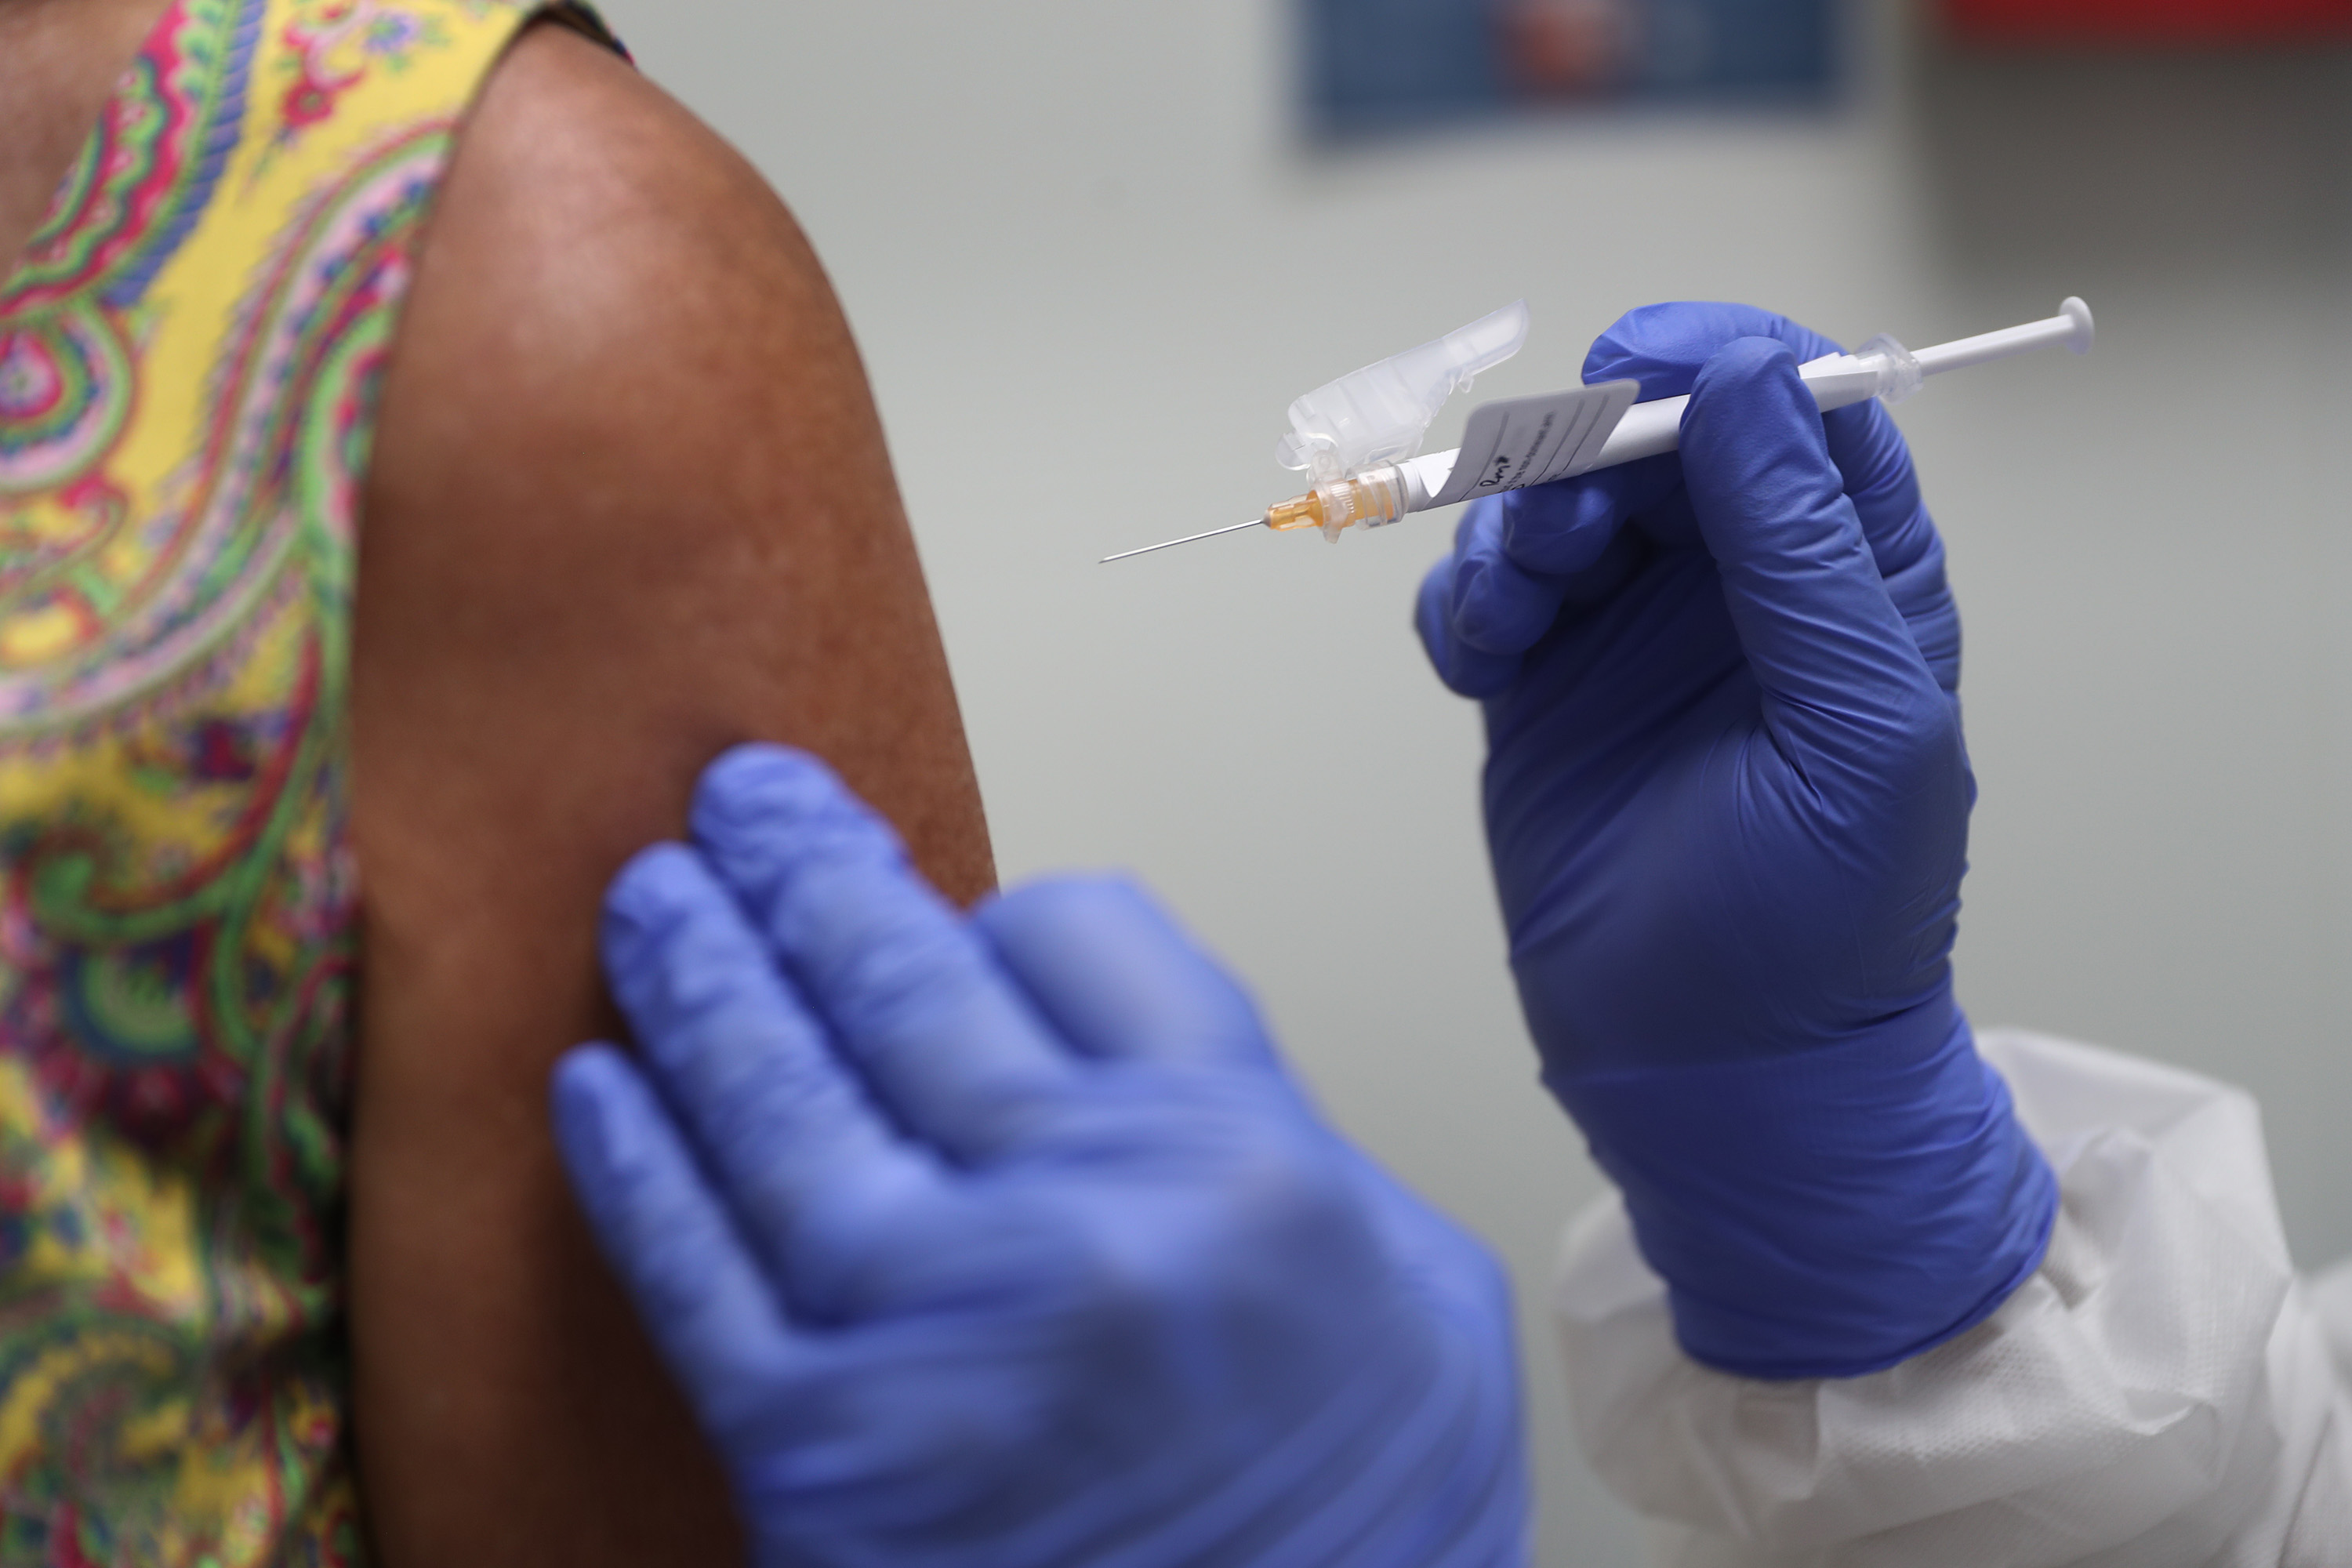 A volunteer takes part in a Covid-19 vaccine trial